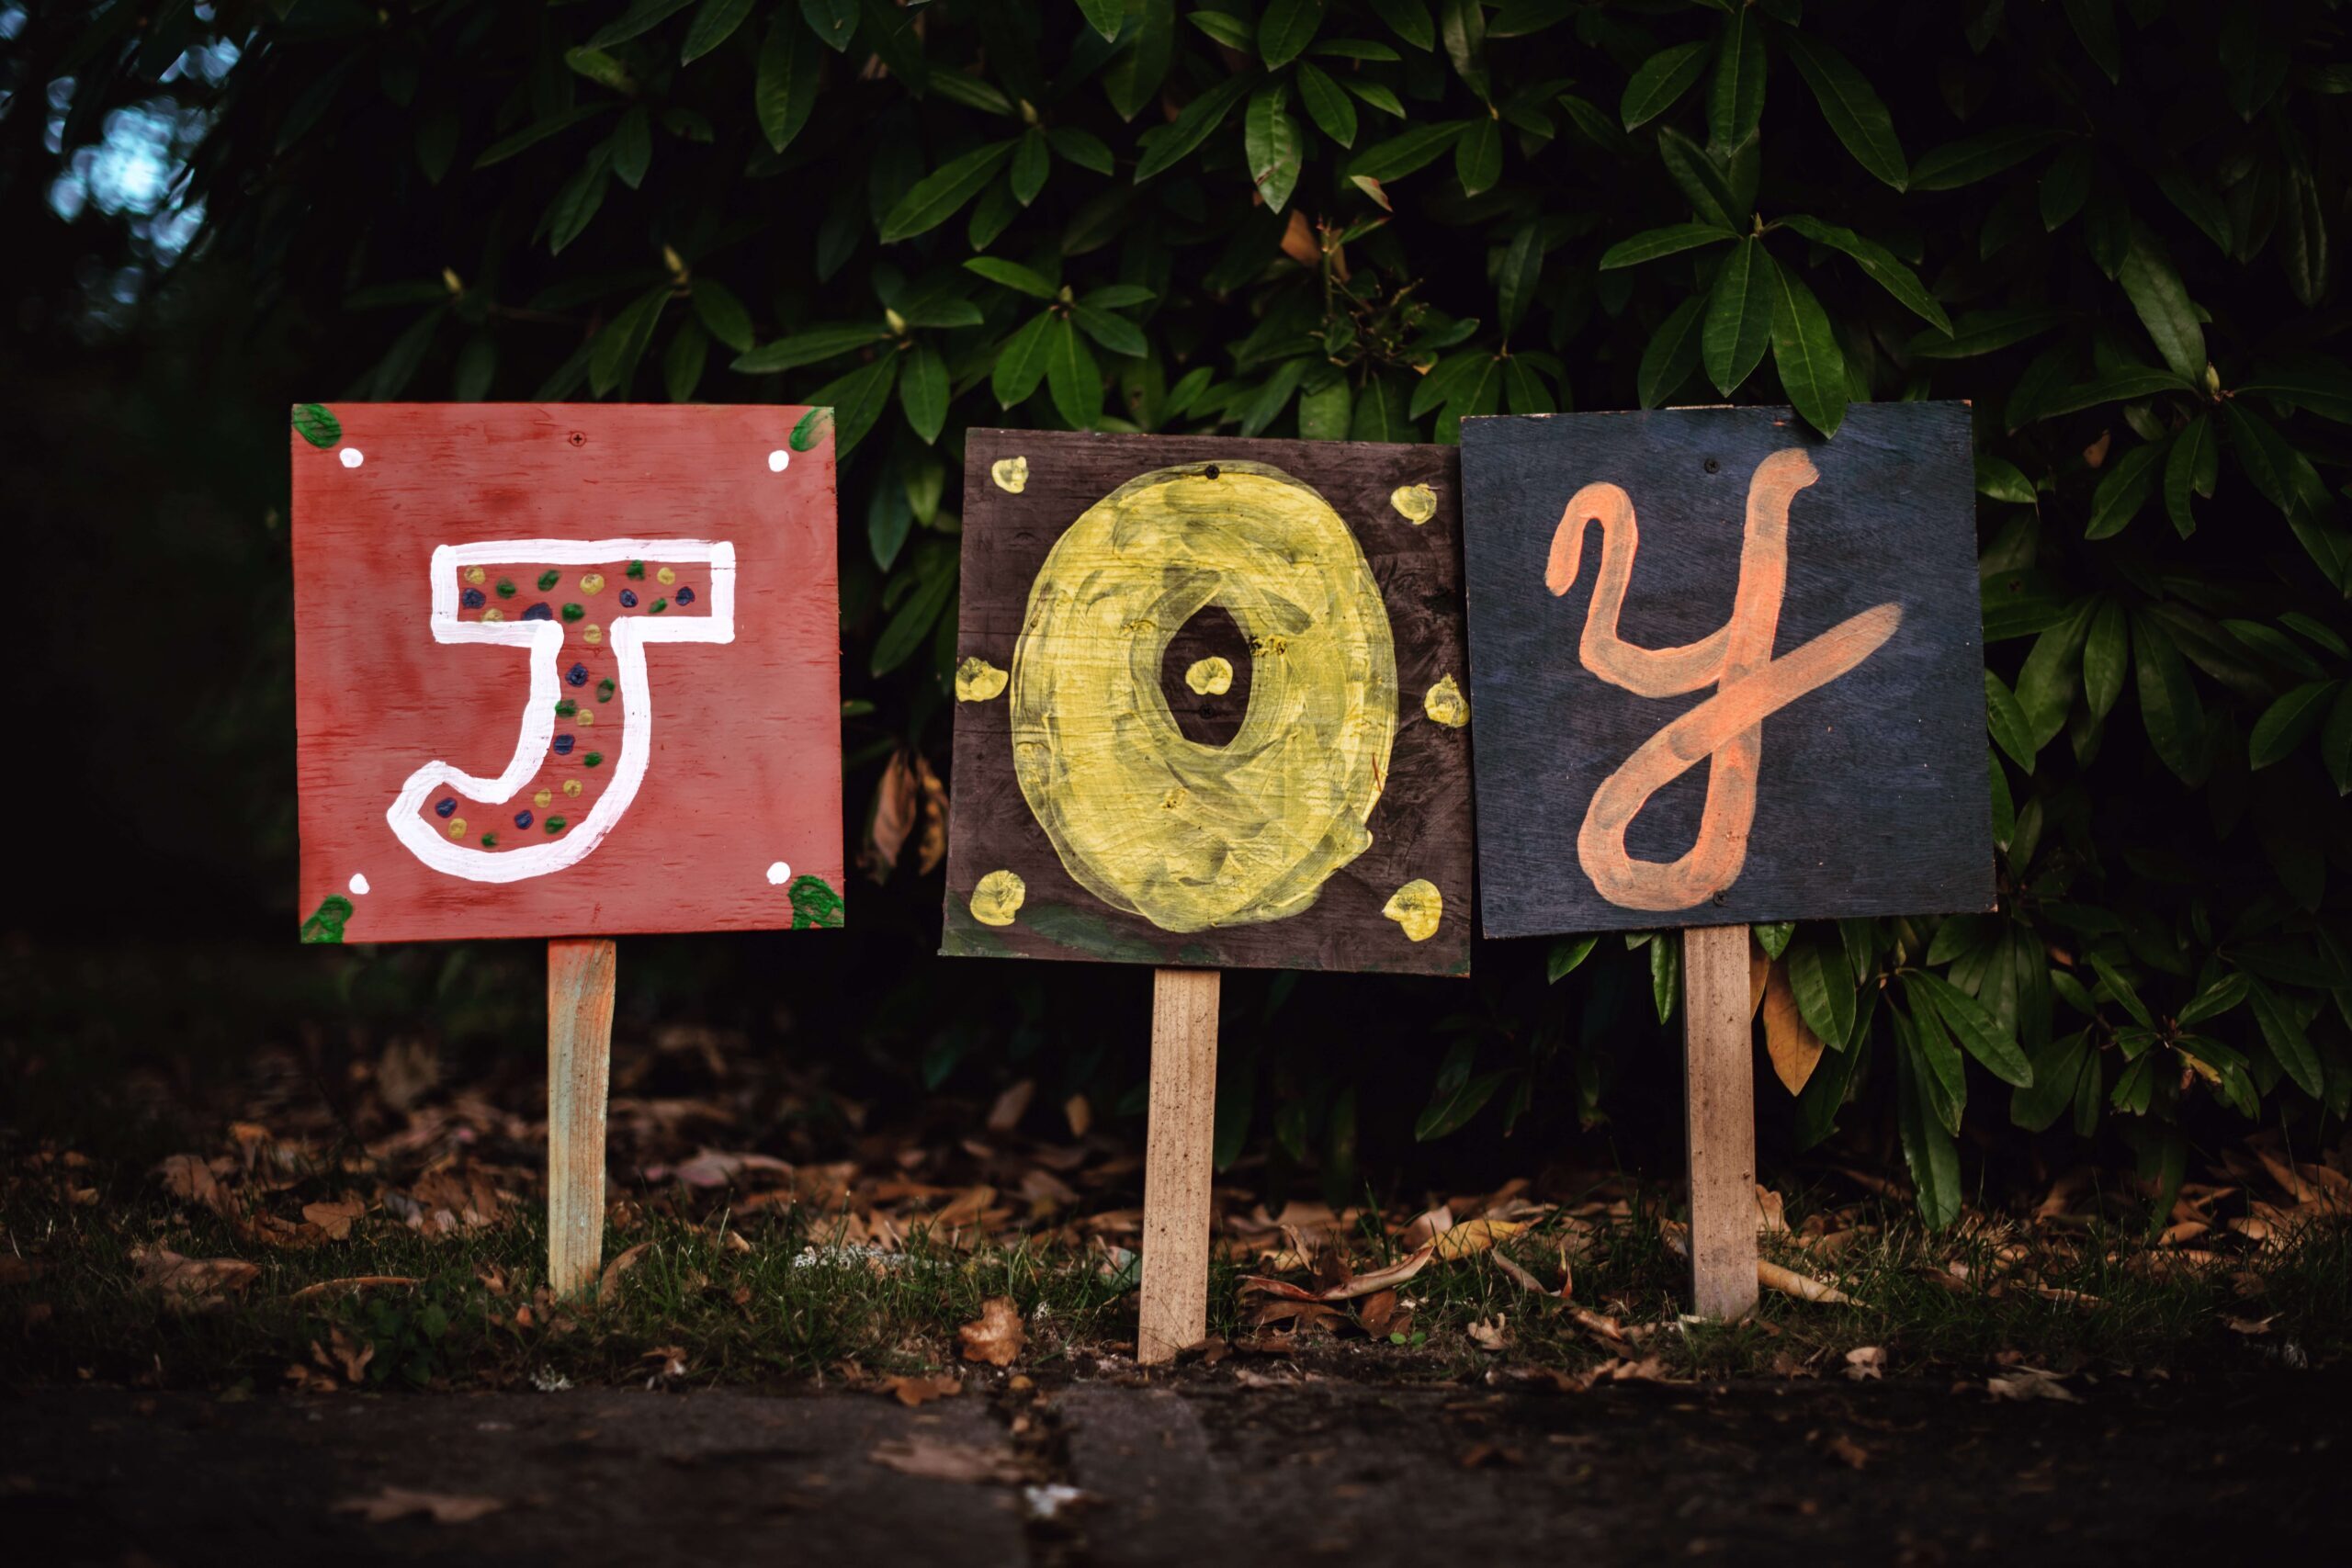 A sign reads J-O-Y and is staked into the ground. Although anxiety can be deliberating, you can experience joy again through anxiety therapy. Sojourner Counseling has anxiety therapists who can do anxiety treatment in Raleigh NC. Contact us today to begin us today to start anxiety treatment.